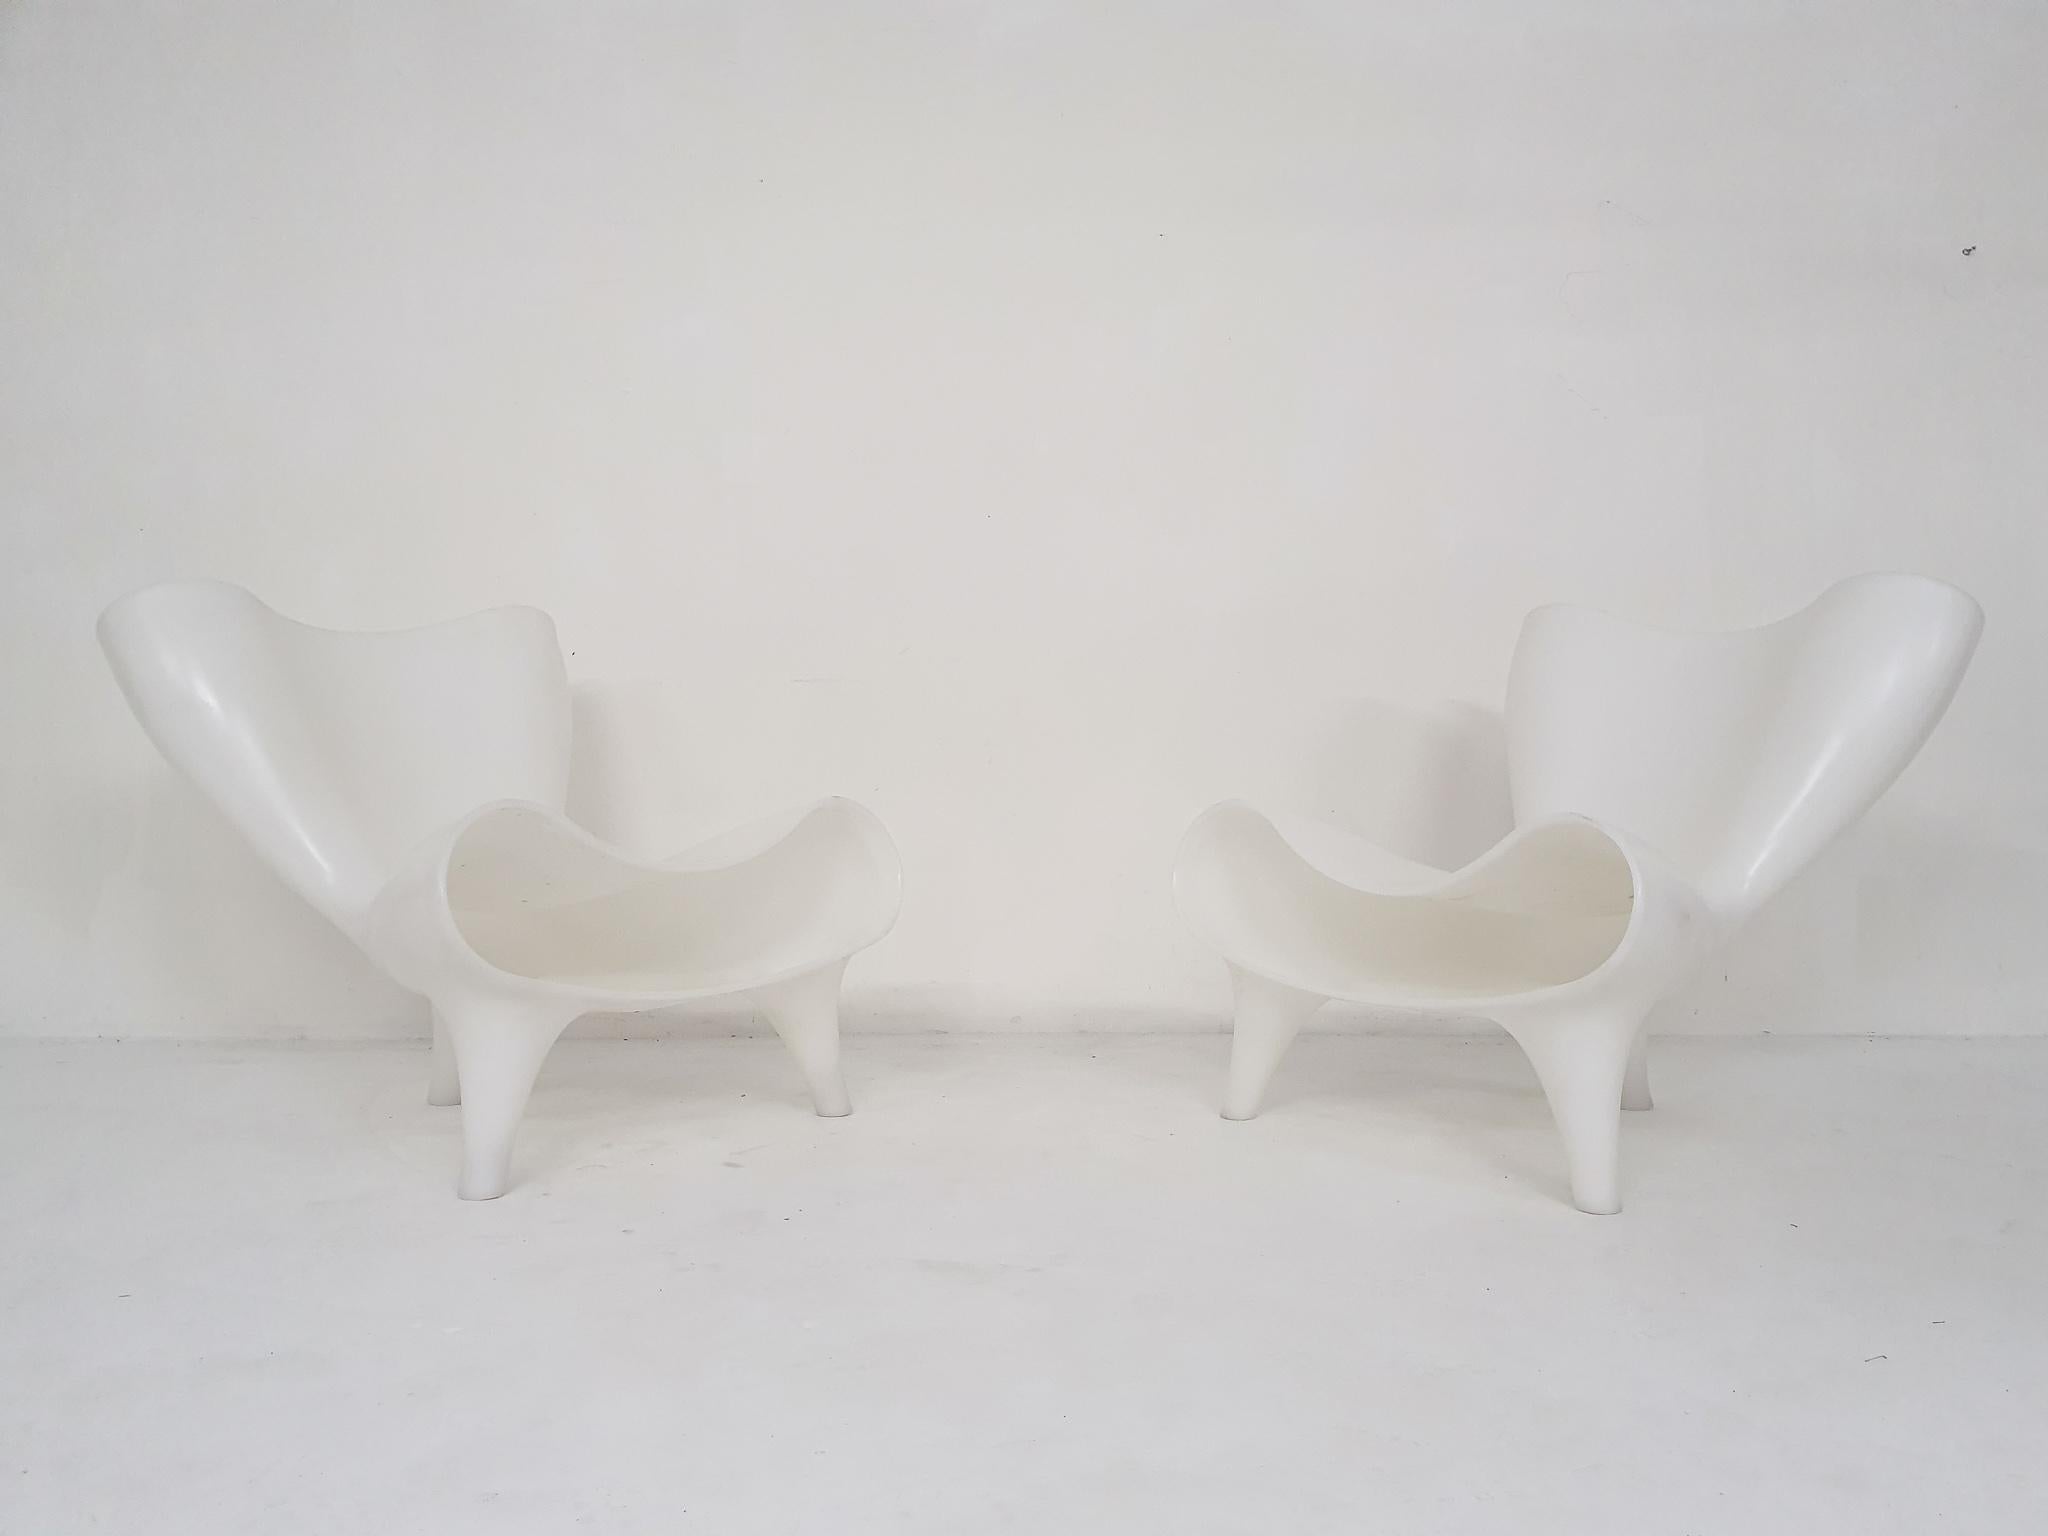 Set of two white fiberglass lounge chairs by Marc Newson for Cappellini, manufactured in 2017.
Some traces consistent with age and use.
Marked at the bottom.